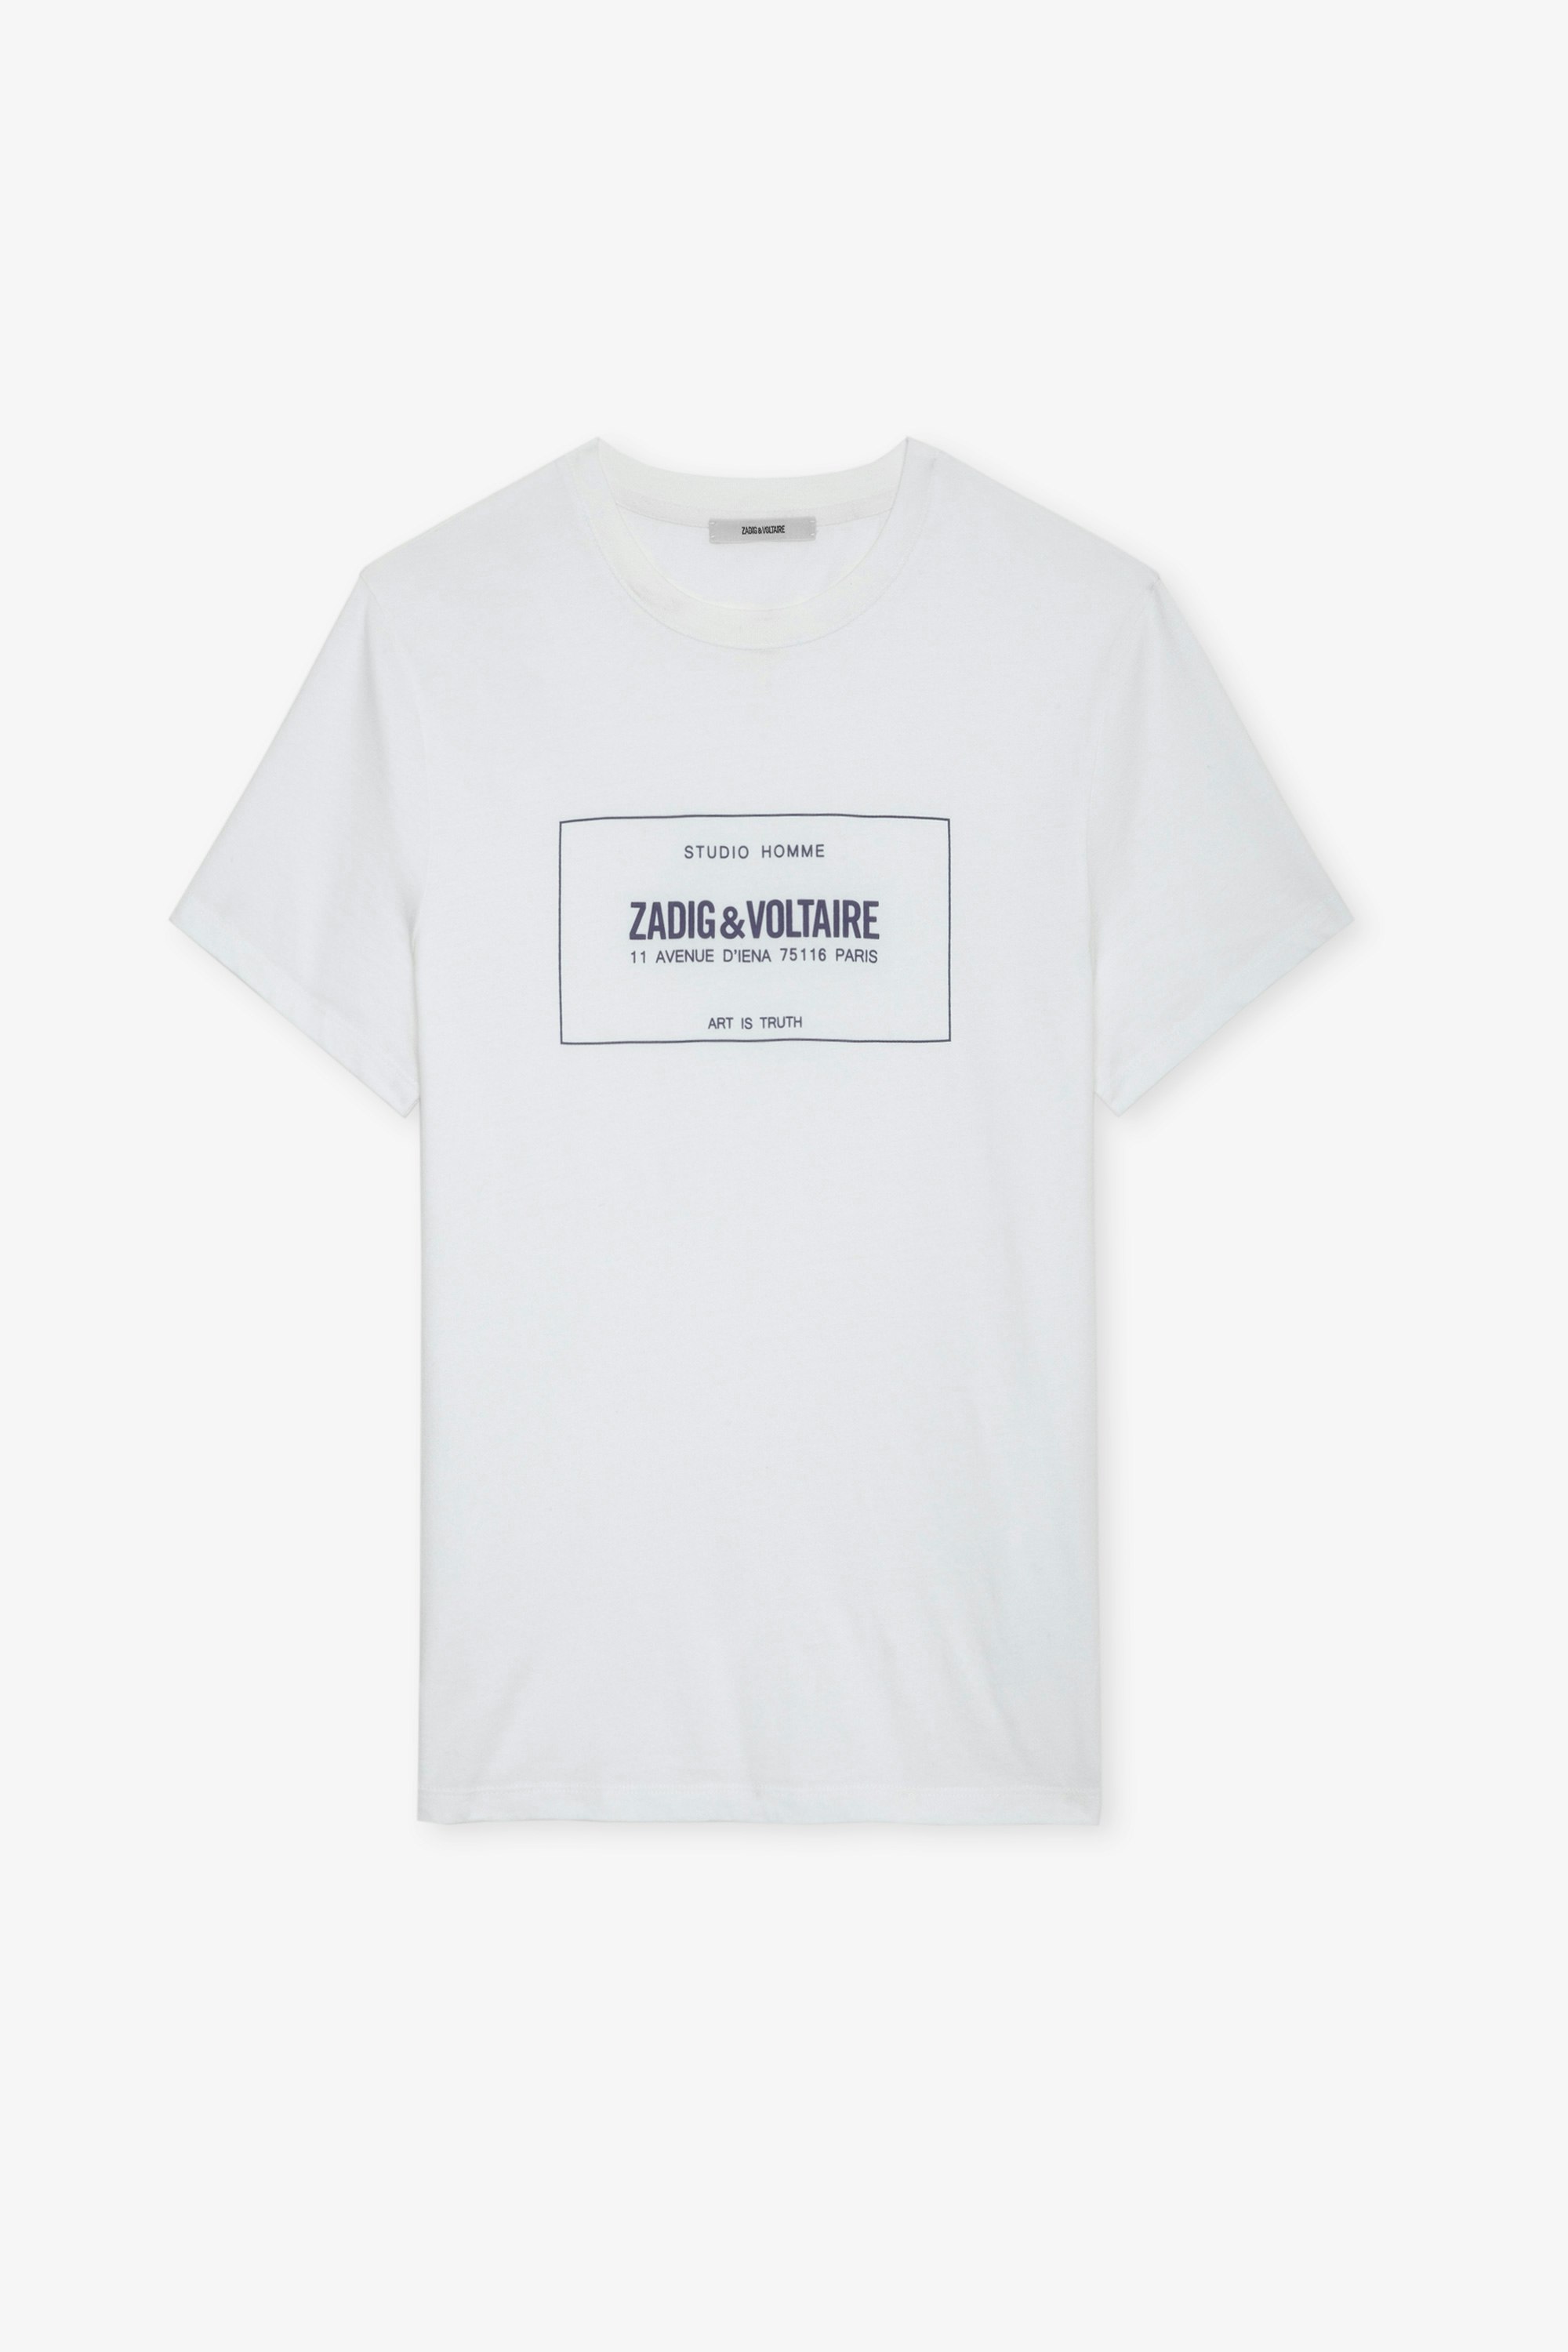 Ted Insignia T-shirt - White cotton round-neck T-shirt with short sleeves and Studio insignia.